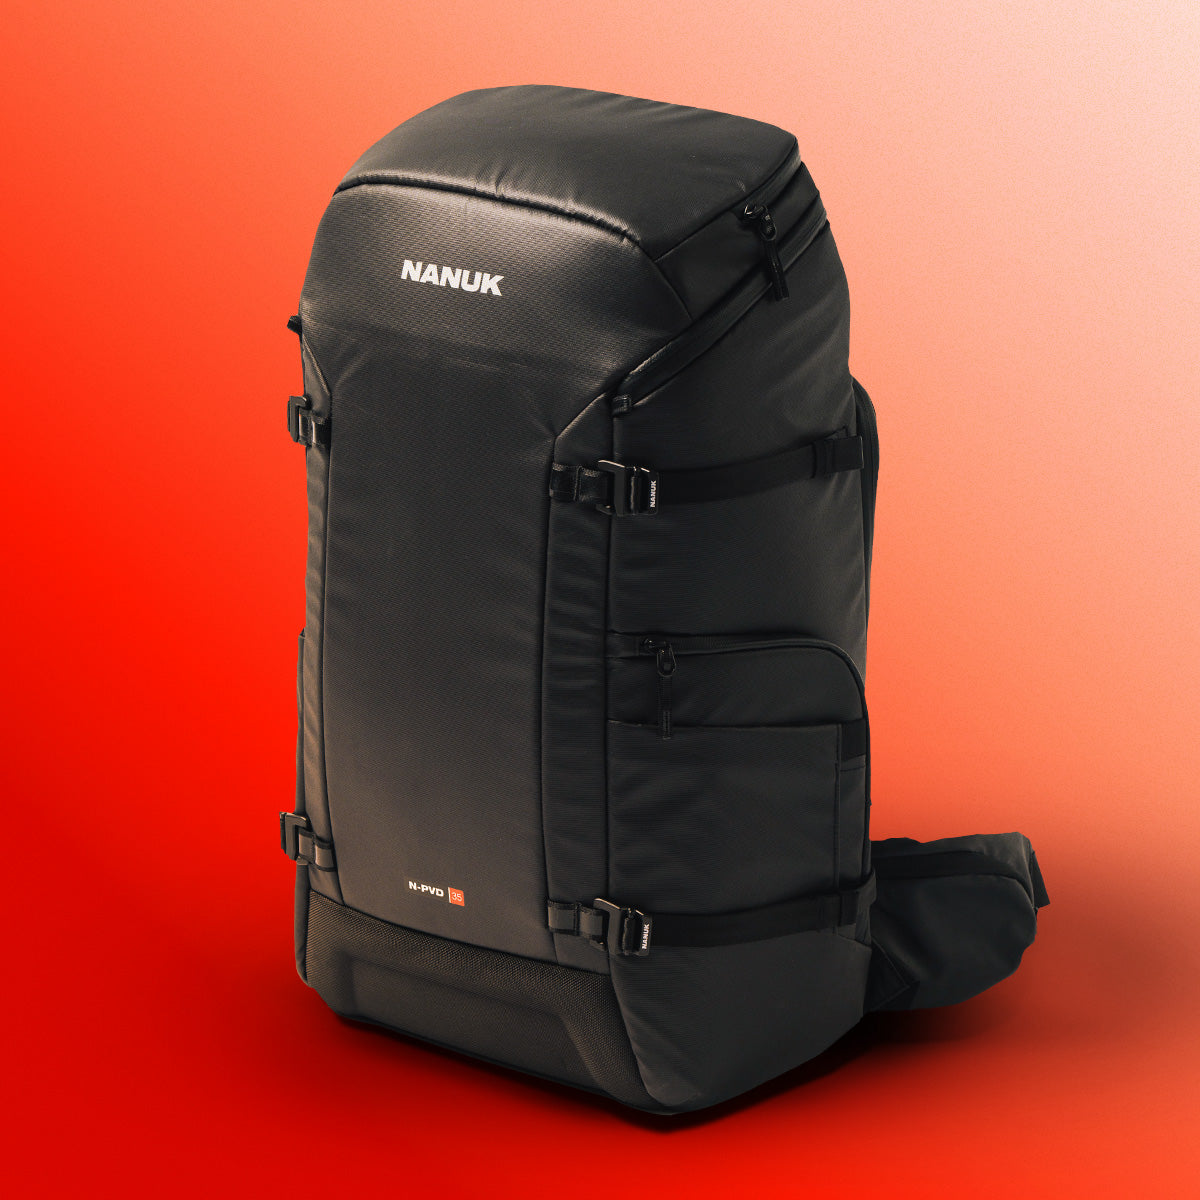 New NANUK Products - Bags and Backpacks